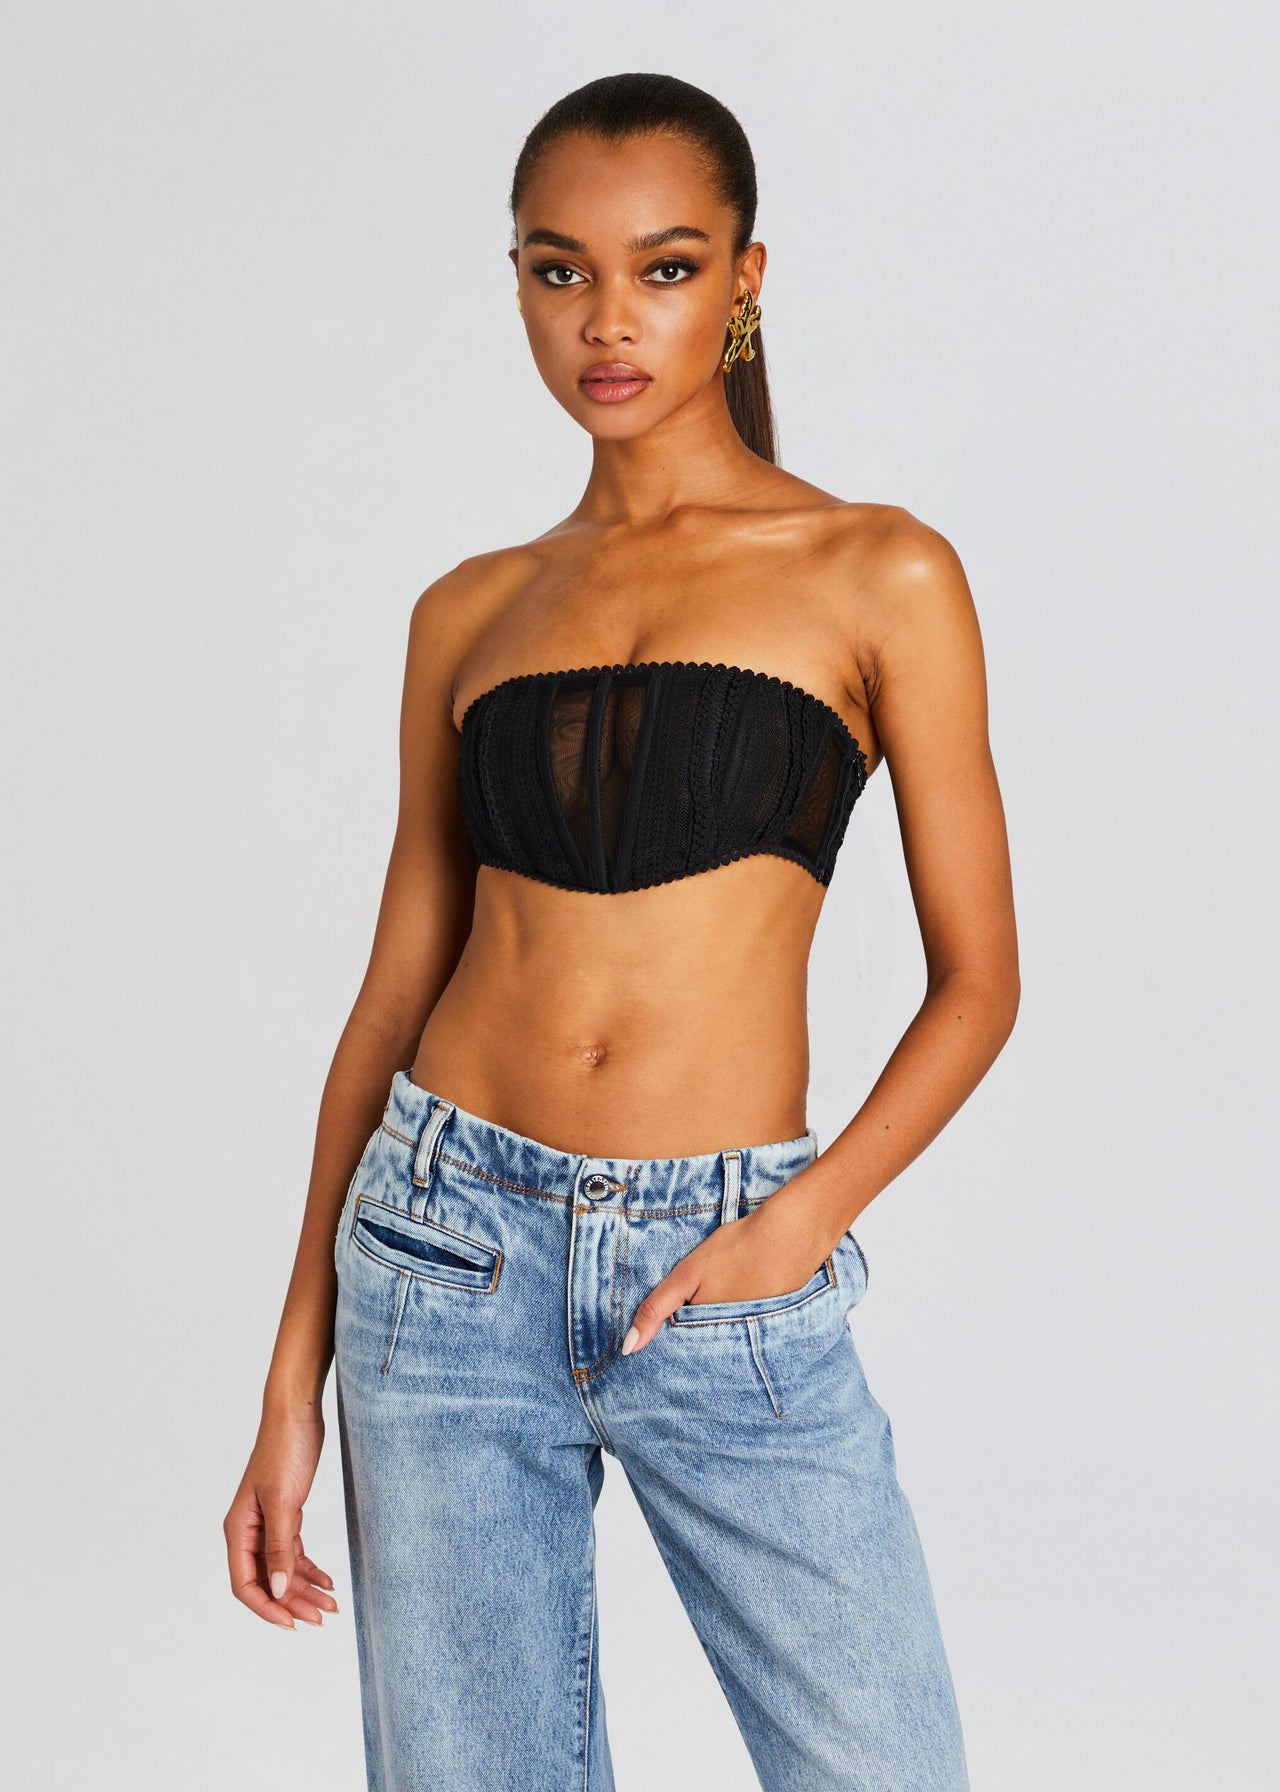 French Embroidery Push Up Bralet Tube Top